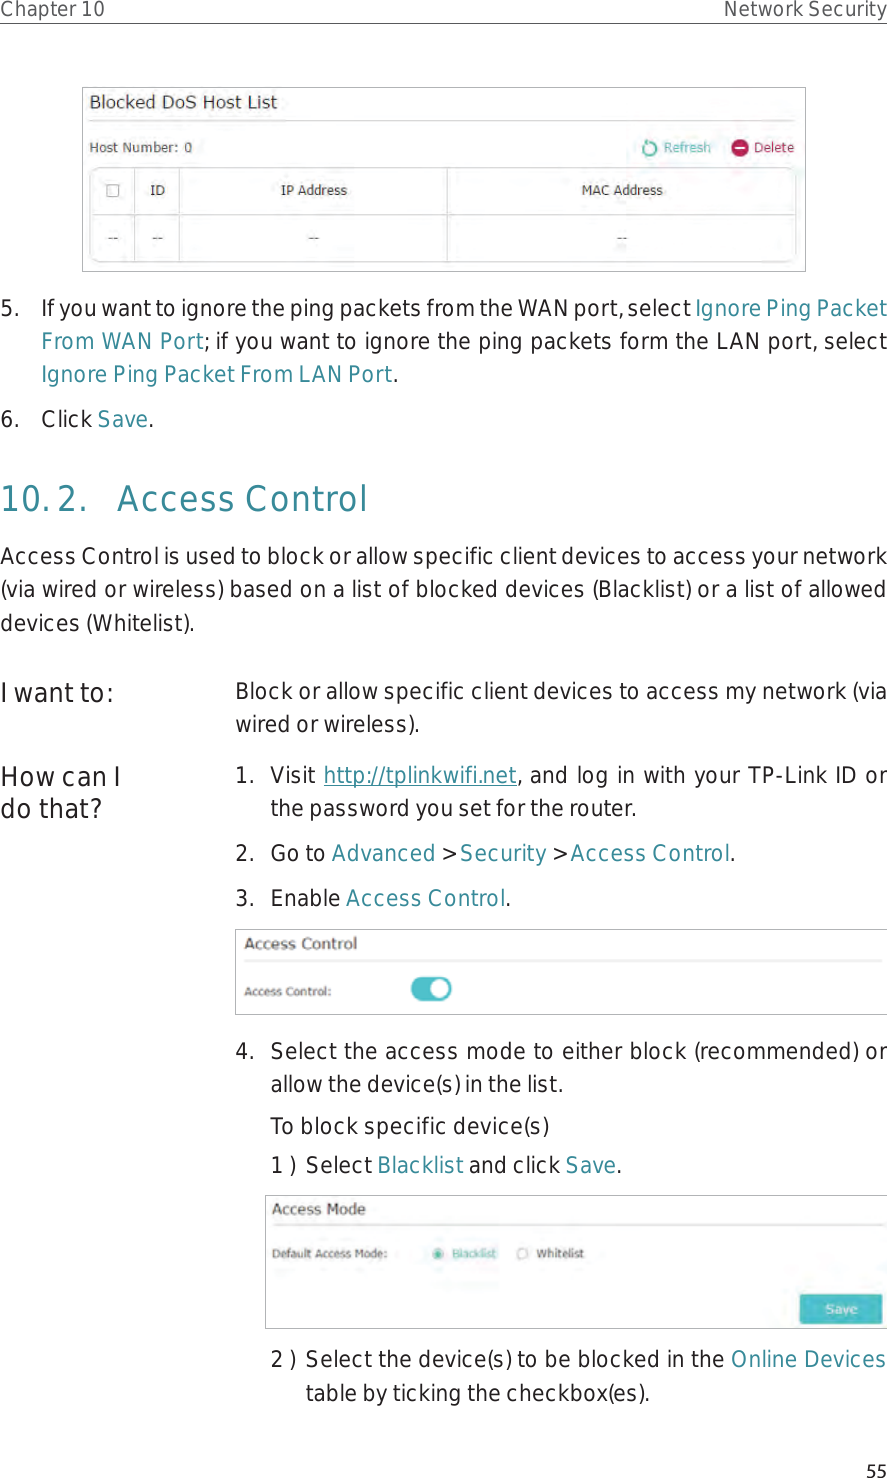 55Chapter 10 Network Security5.  If you want to ignore the ping packets from the WAN port, select Ignore Ping Packet From WAN Port; if you want to ignore the ping packets form the LAN port, select Ignore Ping Packet From LAN Port.6.  Click Save.10. 2.  Access ControlAccess Control is used to block or allow specific client devices to access your network (via wired or wireless) based on a list of blocked devices (Blacklist) or a list of allowed devices (Whitelist).Block or allow specific client devices to access my network (via wired or wireless).1.  Visit http://tplinkwifi.net, and log in with your TP-Link ID or the password you set for the router.2.  Go to Advanced &gt; Security &gt; Access Control.3.  Enable Access Control.4.  Select the access mode to either block (recommended) or allow the device(s) in the list.To block specific device(s)1 )  Select Blacklist and click Save.2 )  Select the device(s) to be blocked in the Online Devices table by ticking the checkbox(es).I want to:How can I do that?